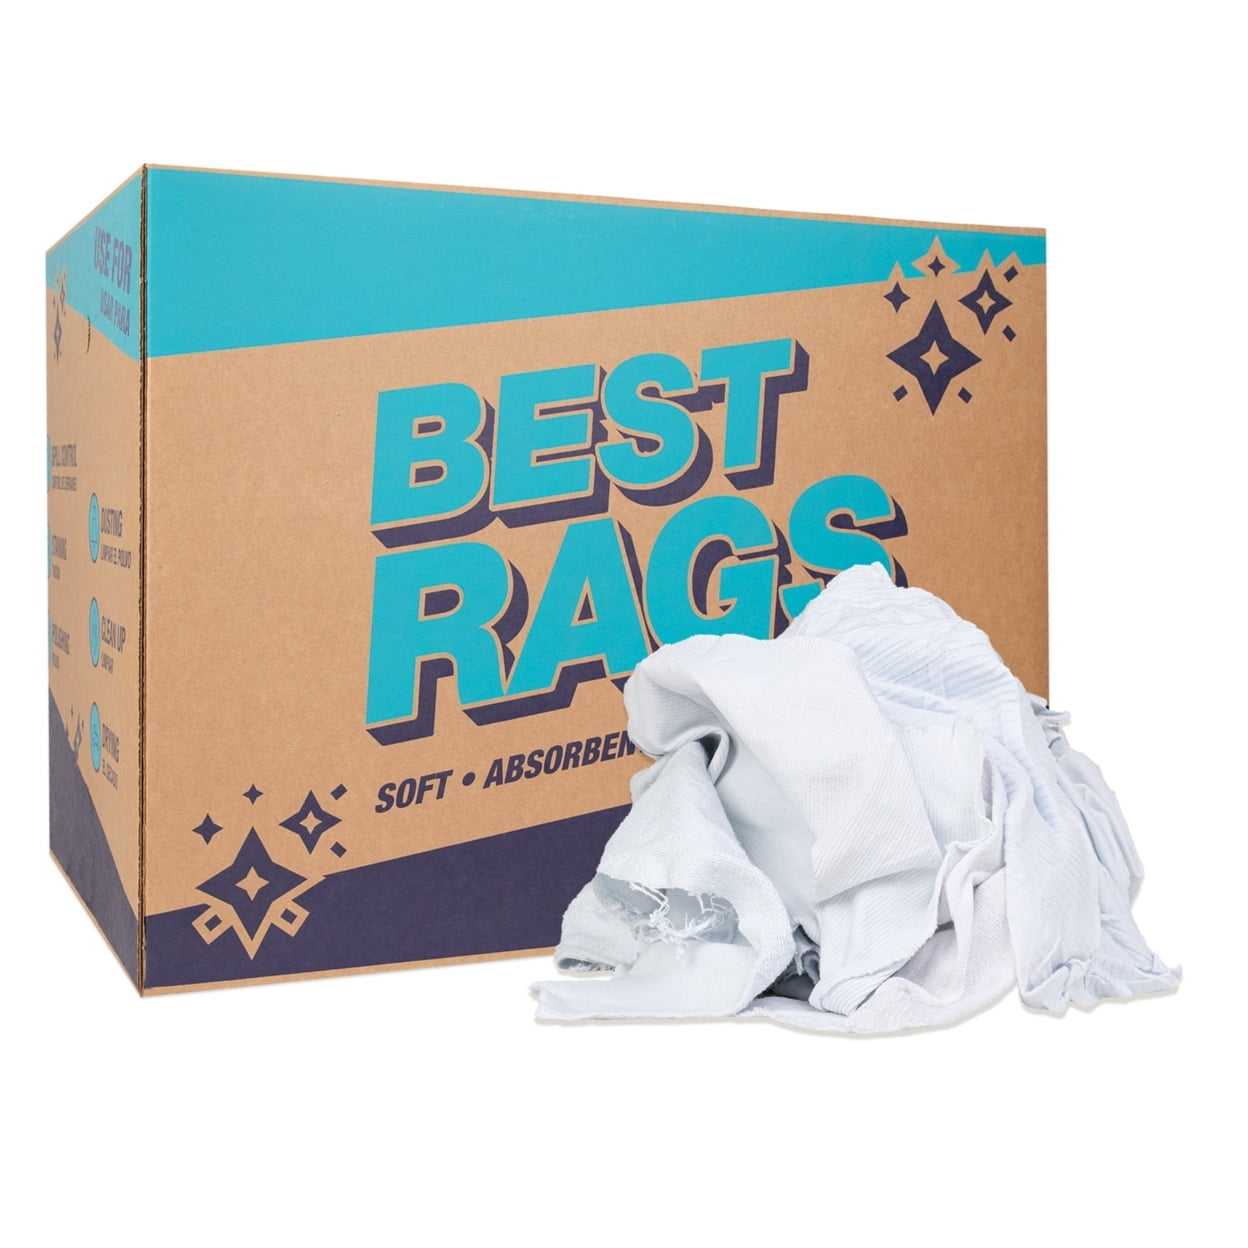 A&A Wiping Cloth New White Knit Rags, Smooth White Rags for Painting,  Staining, and Cleaning, 5 Pound Box